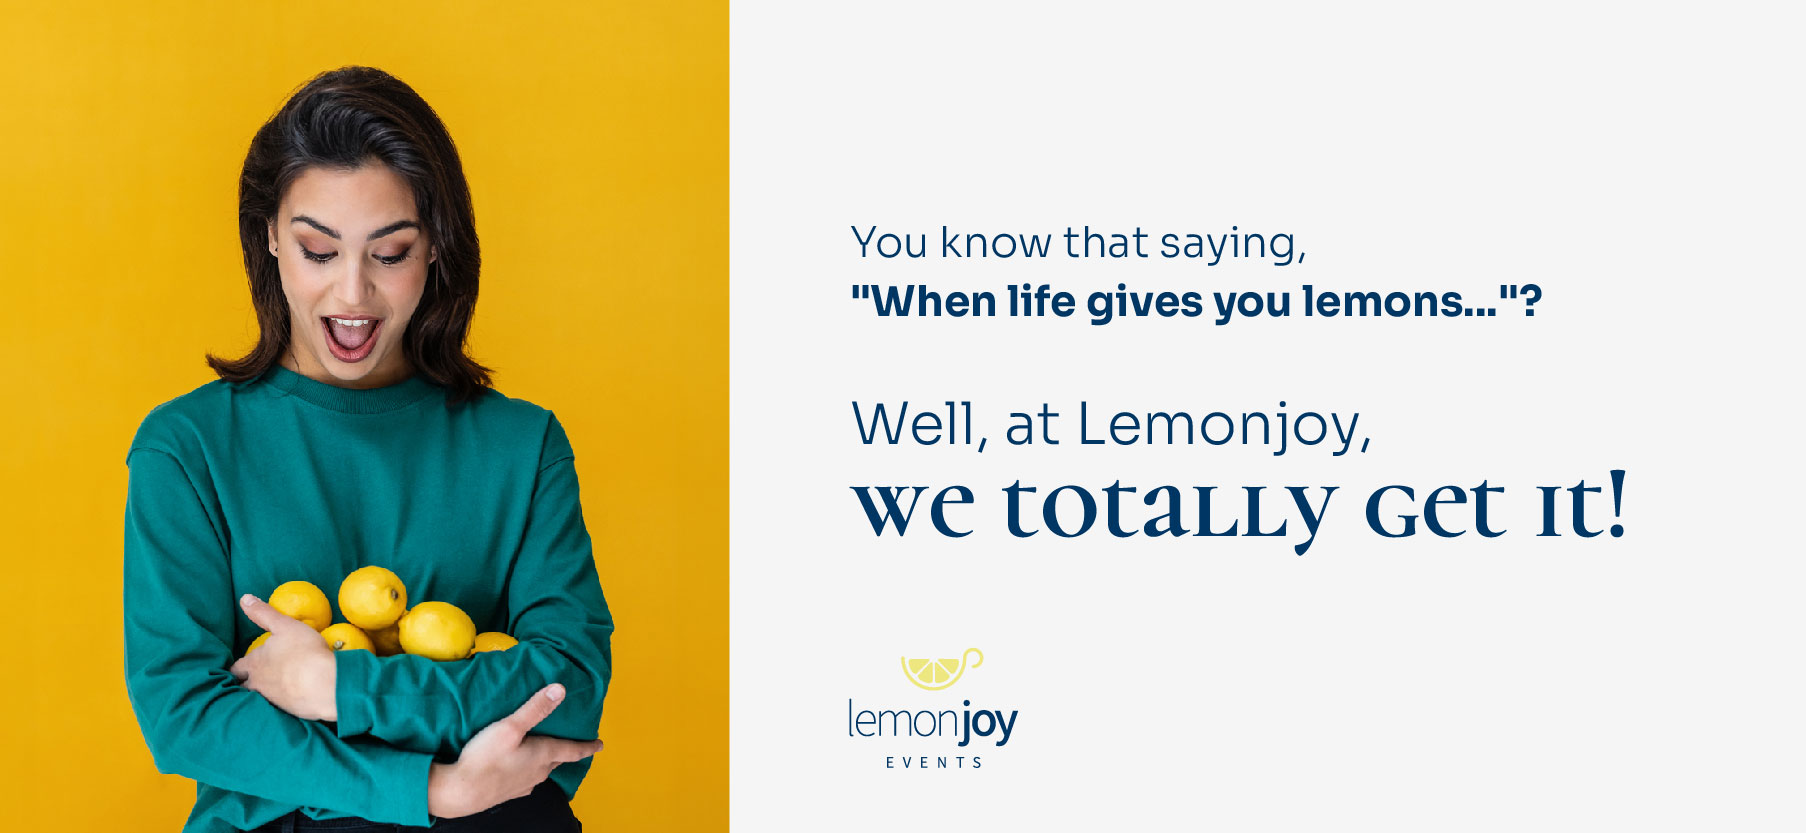 Crafting unforgettable experiences: The LemonJoy approach